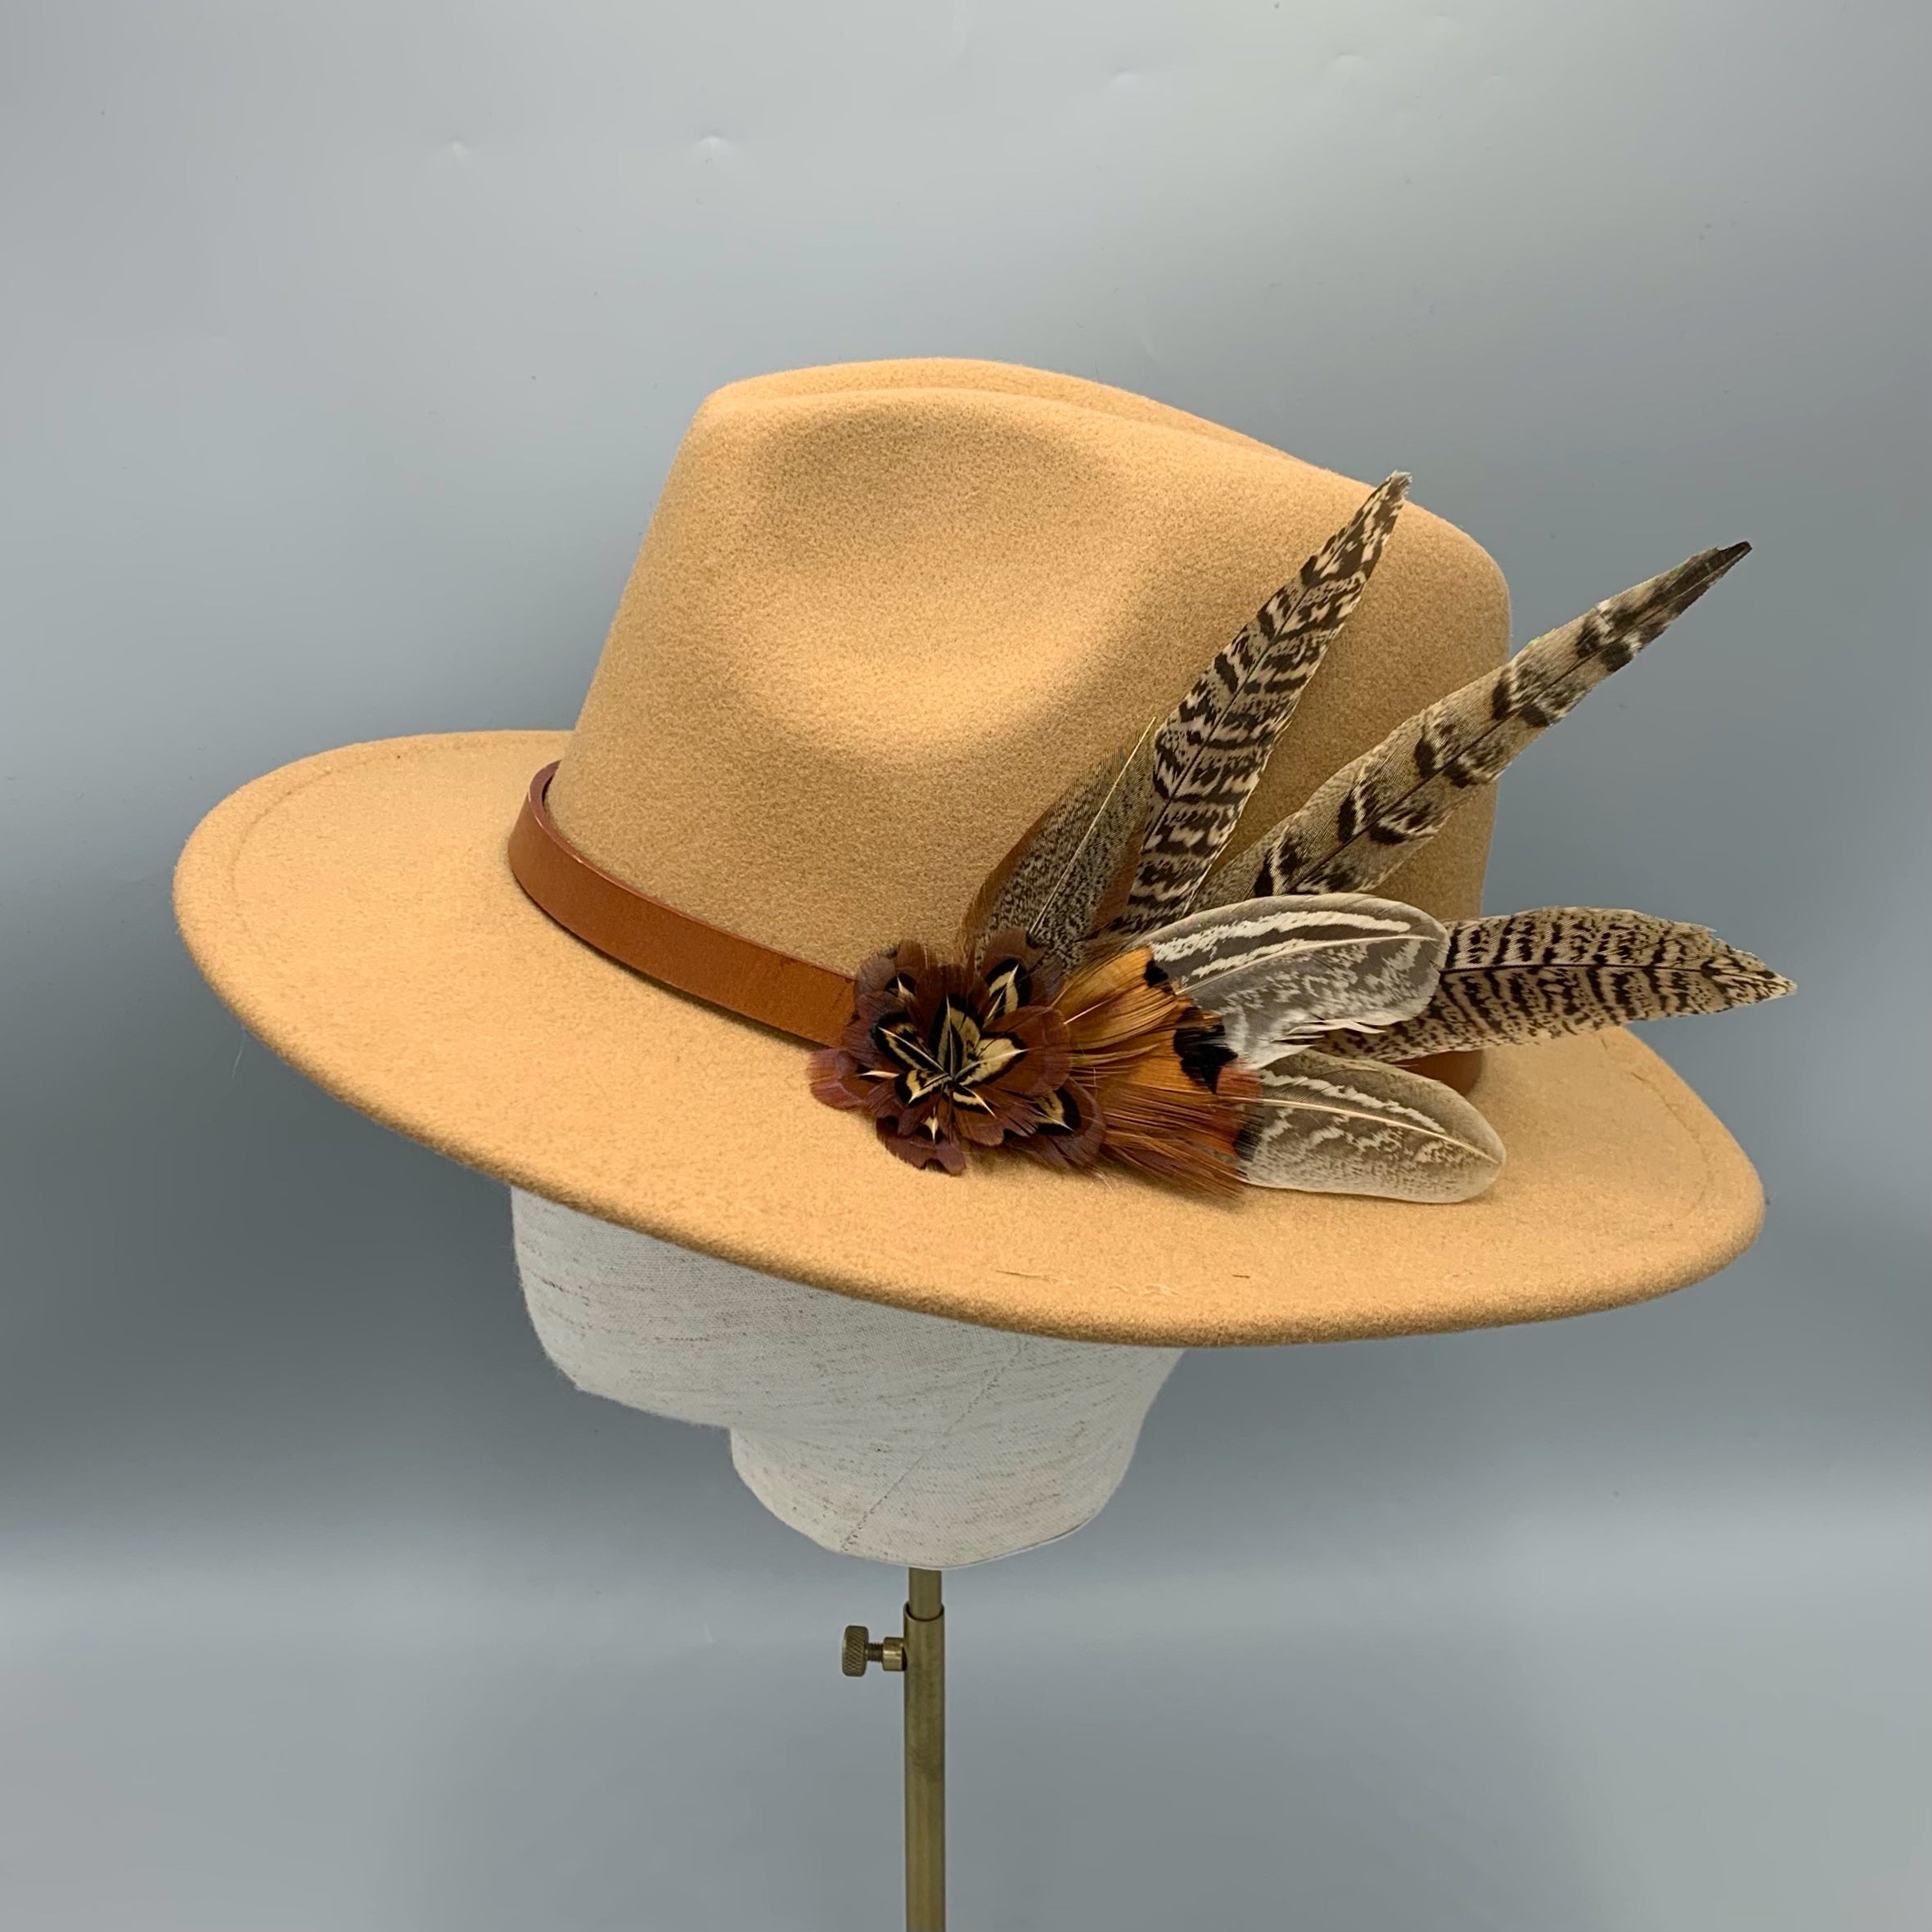 Camel fedora hand embellished with natural game bird feathers